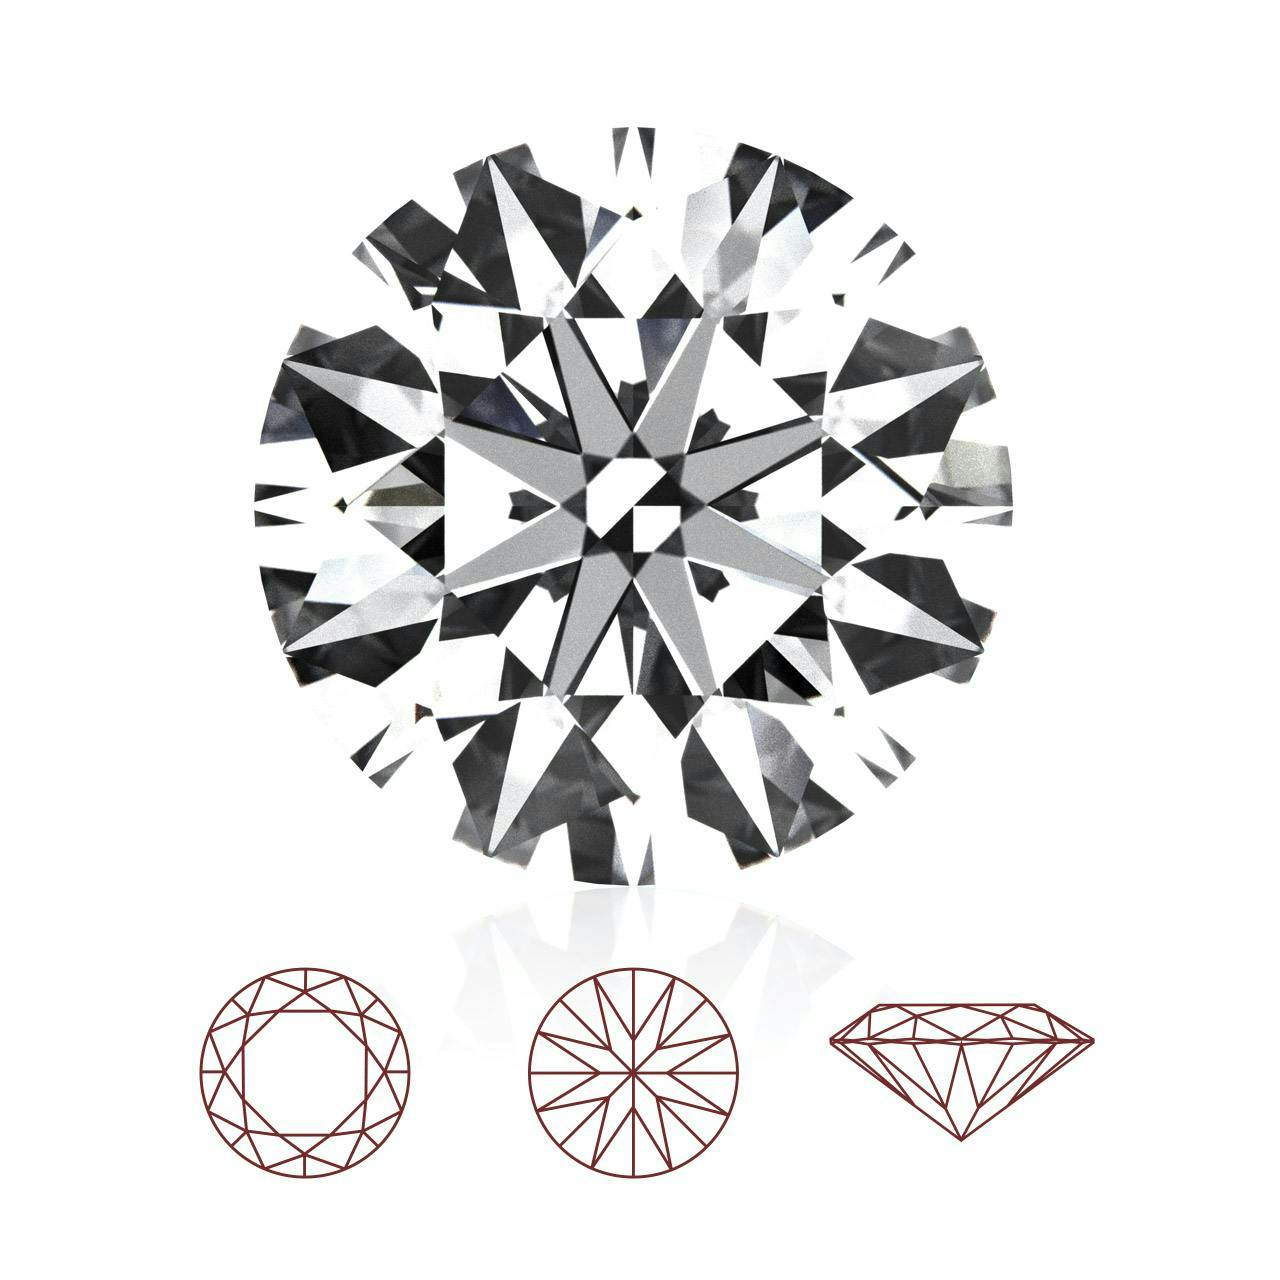 Round brilliant cut among different types of diamond cut from different angles